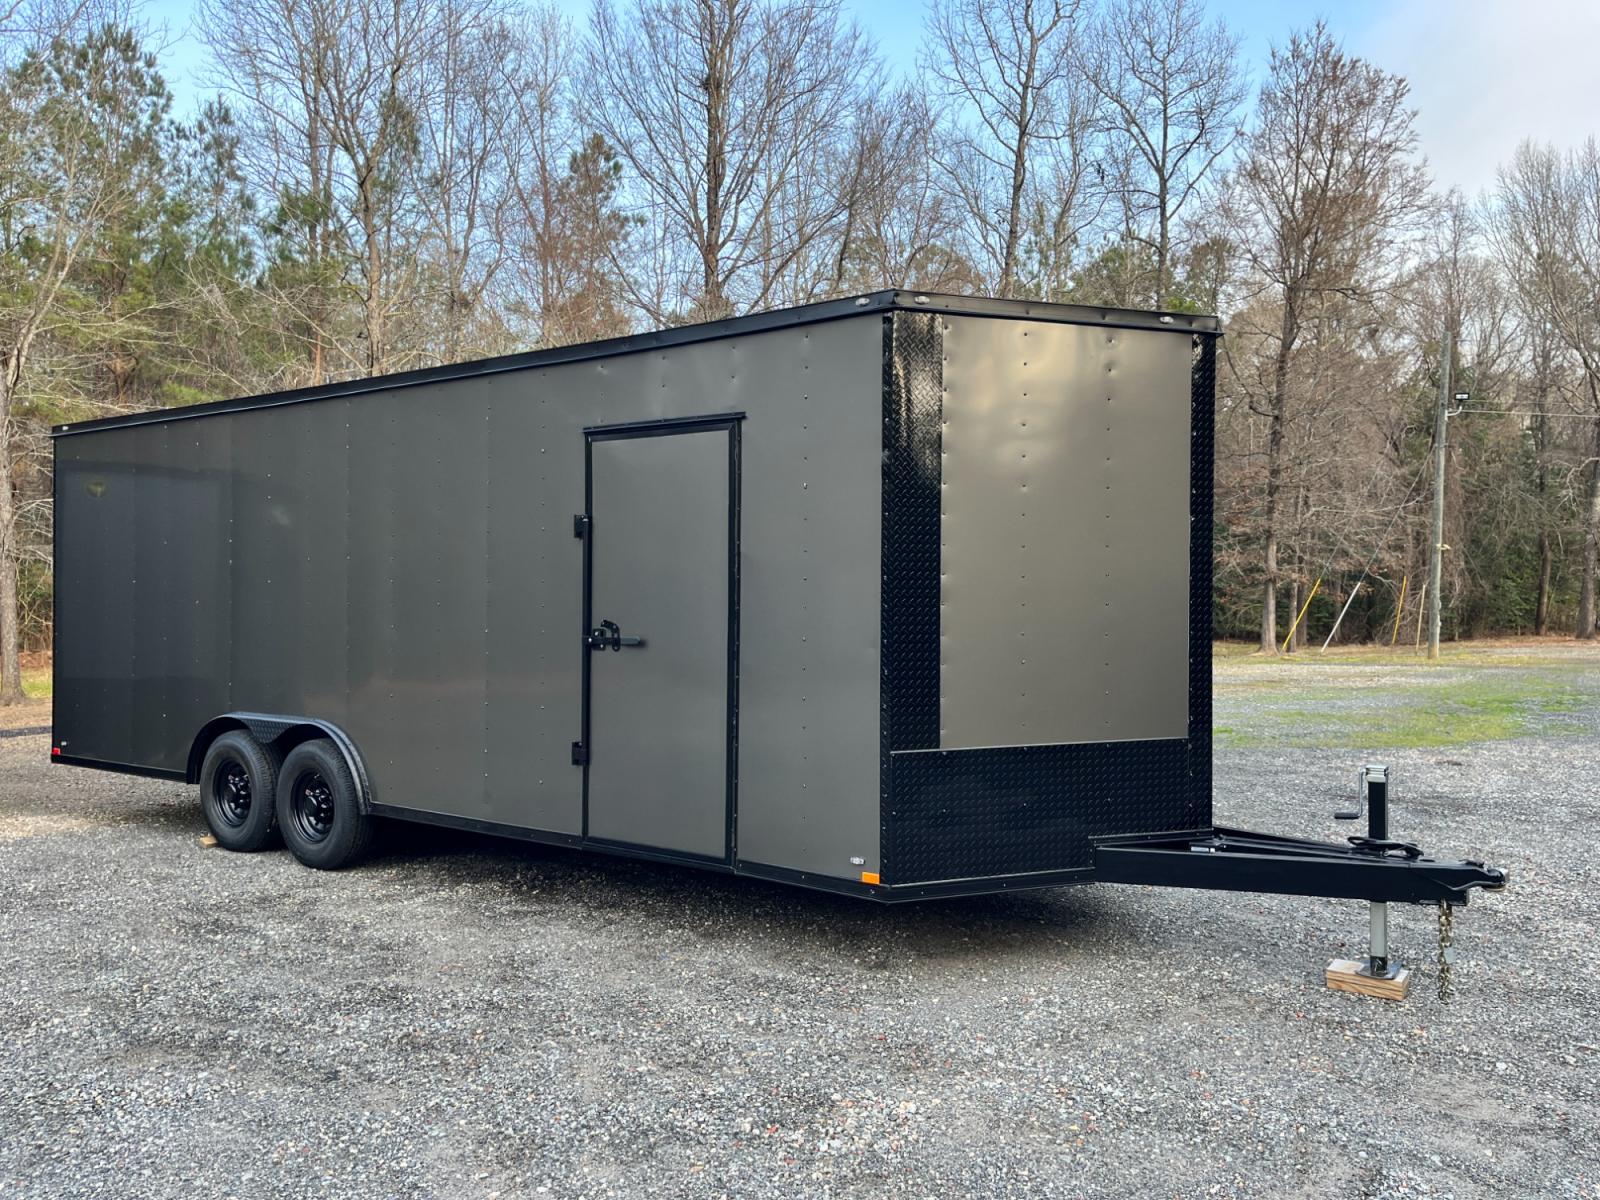 2023 .080 Charcoal Metallic w/Black Out Pkg. Elite Cargo 8.5ft X 24ft Tandem , located at 1330 Rainey Rd., Macon, 31220, (478) 960-1044, 32.845638, -83.778687 - Brand New 2023 Model Elite Cargo Trailer, Made in Tifton, GA 7ft 5" Tall Inside Height This Deluxe Enclosed Car Hauler has Awesome Features! .080 Thick Charcoal Metallic Skin! Awesome "Black Out Trim Package!" 2 Inside LED Dome Lights with Wall Switch! Much Taller Inside, 7ft 5" Tall Inside. Th - Photo #18